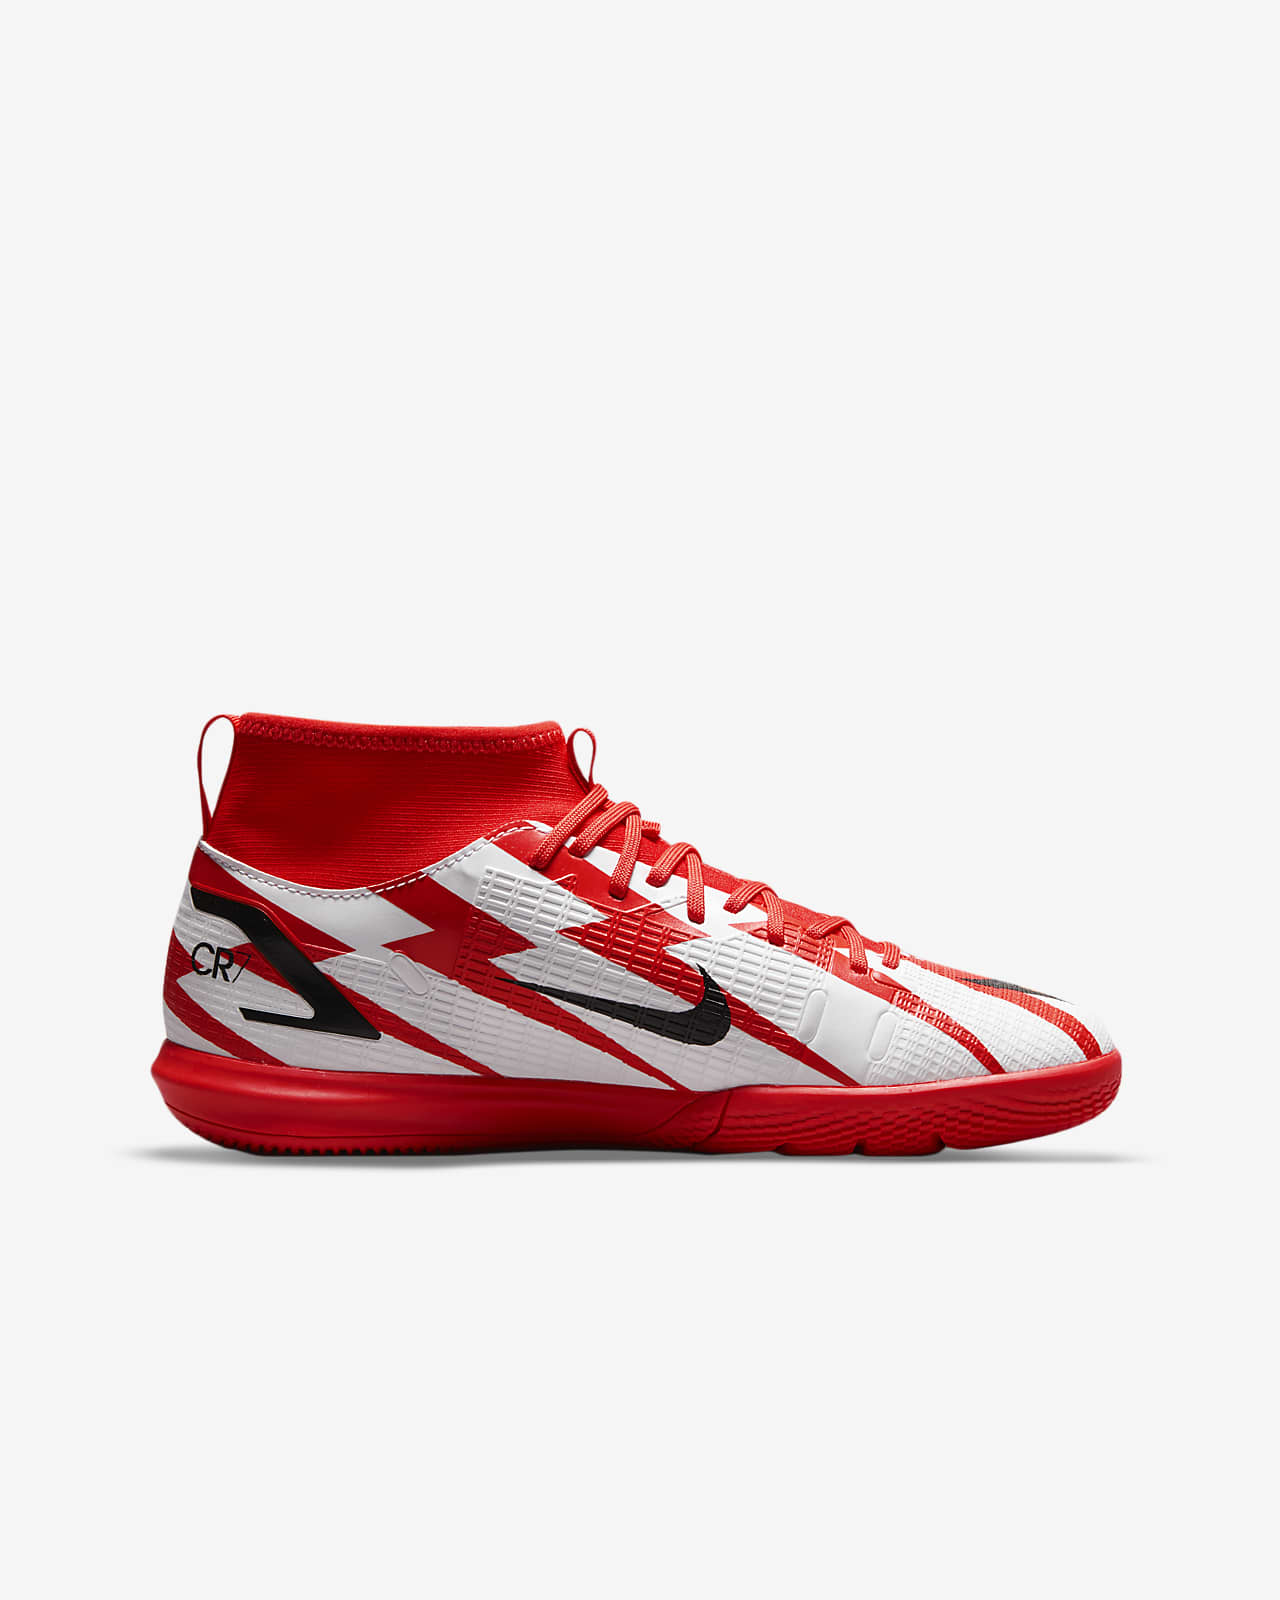 nike mercurial youth indoor soccer shoes